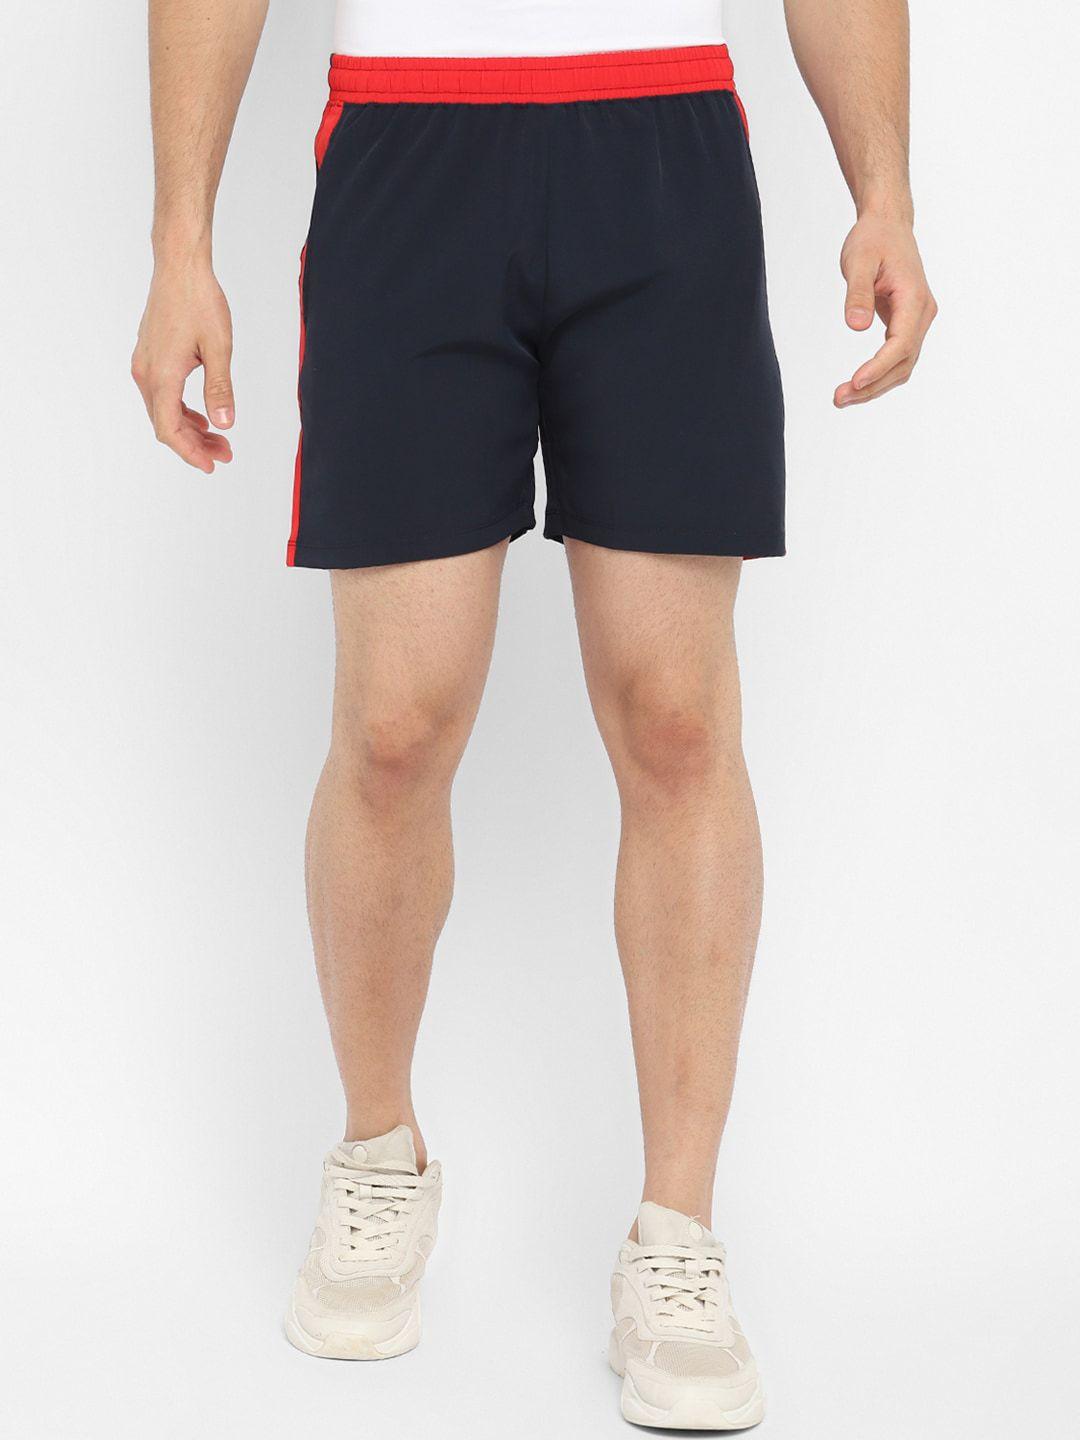 off limits men navy blue training or gym sports shorts with antimicrobial technology